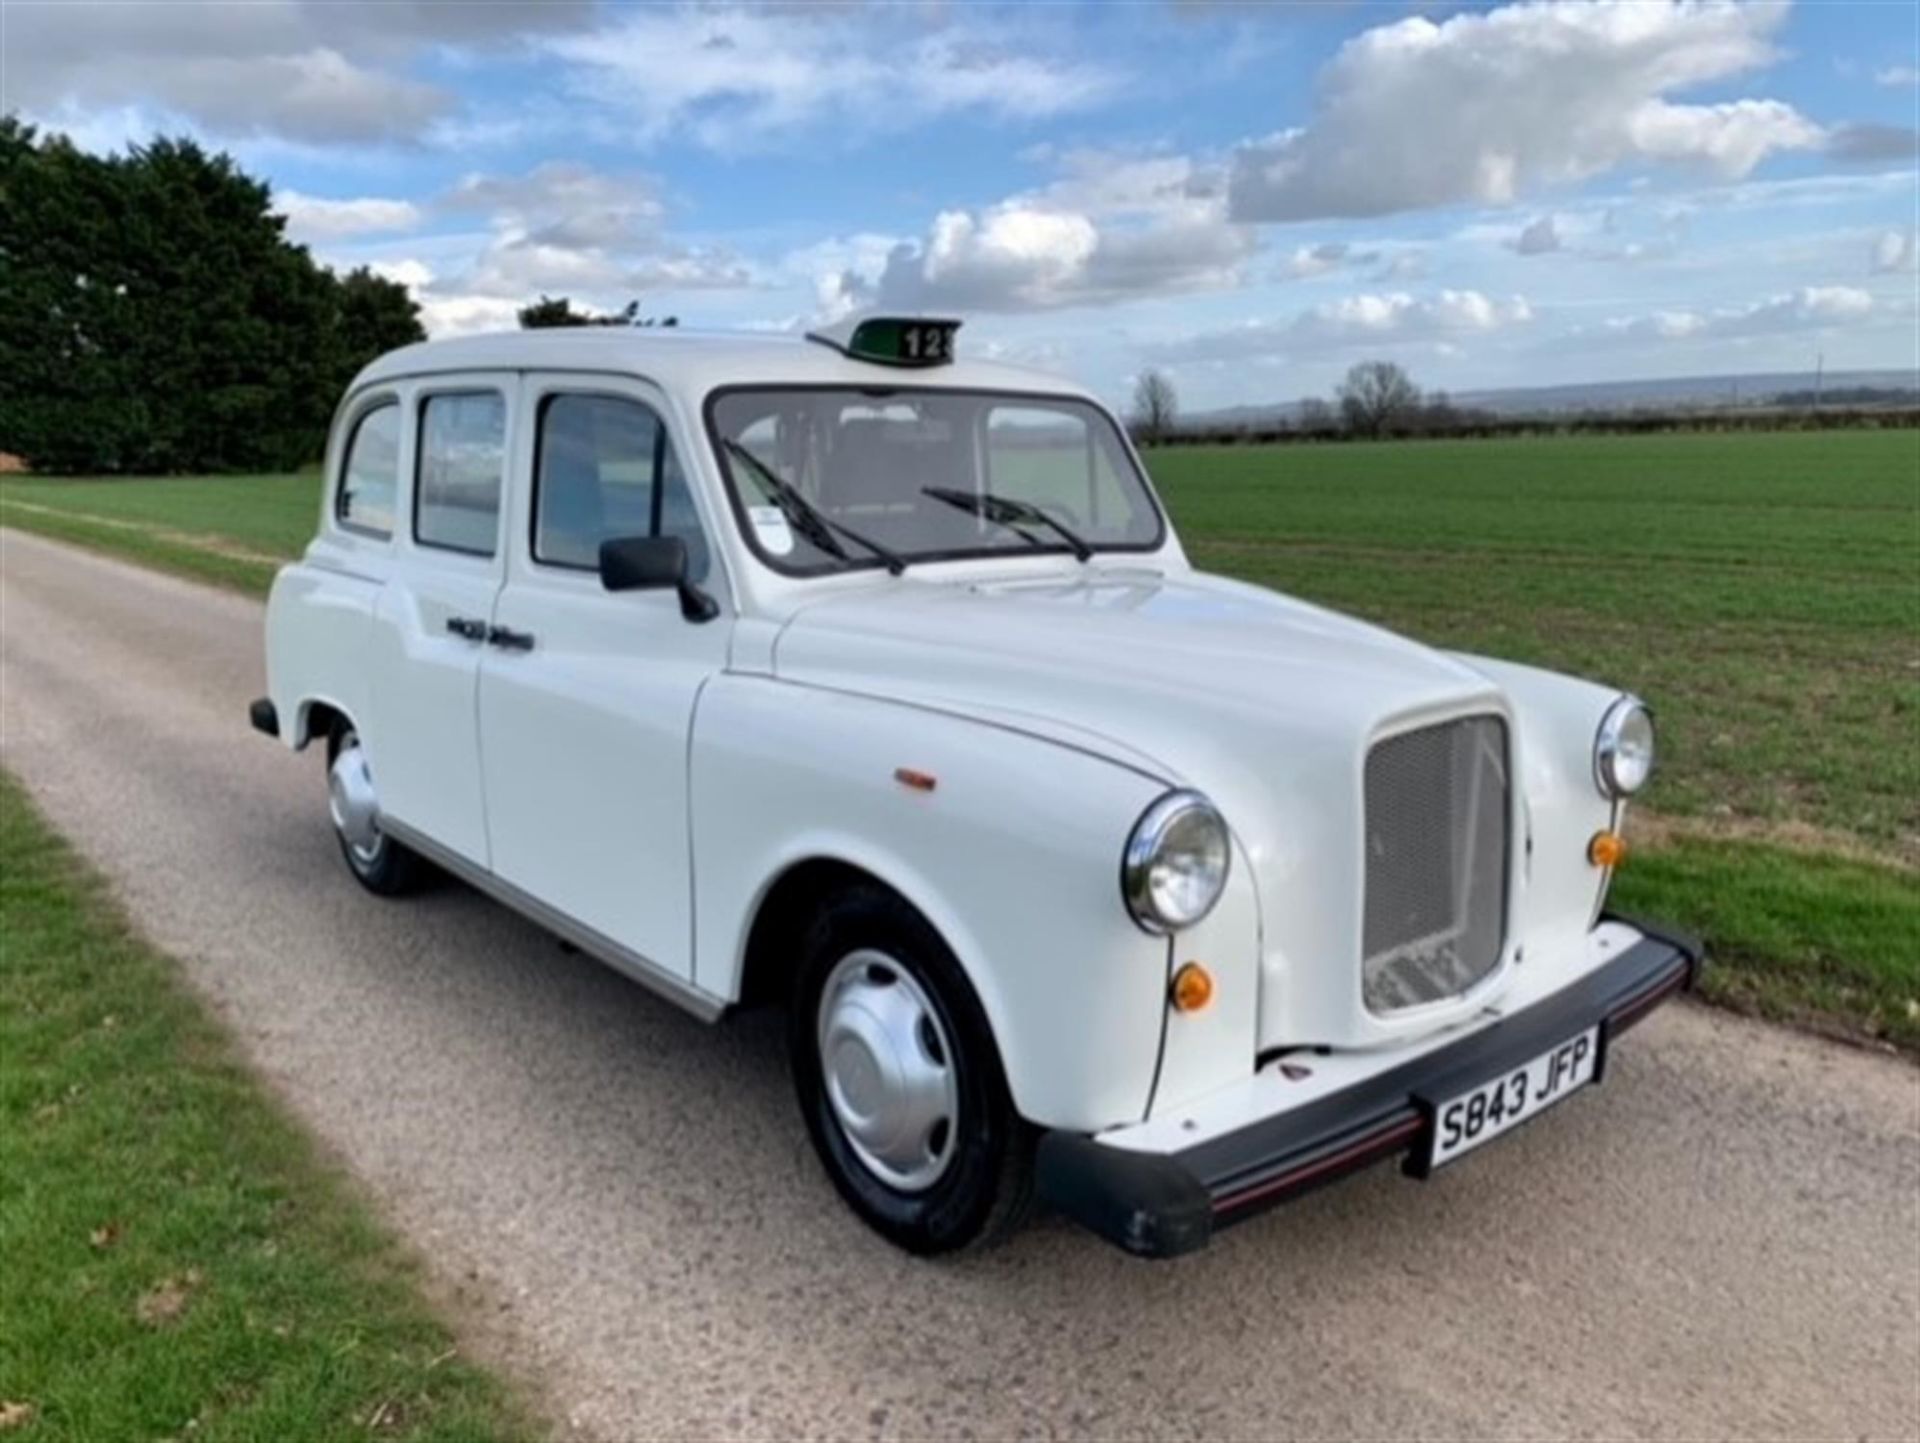 1999 LTI London Fairway taxi (Just 1,993 miles from new) - Image 10 of 12